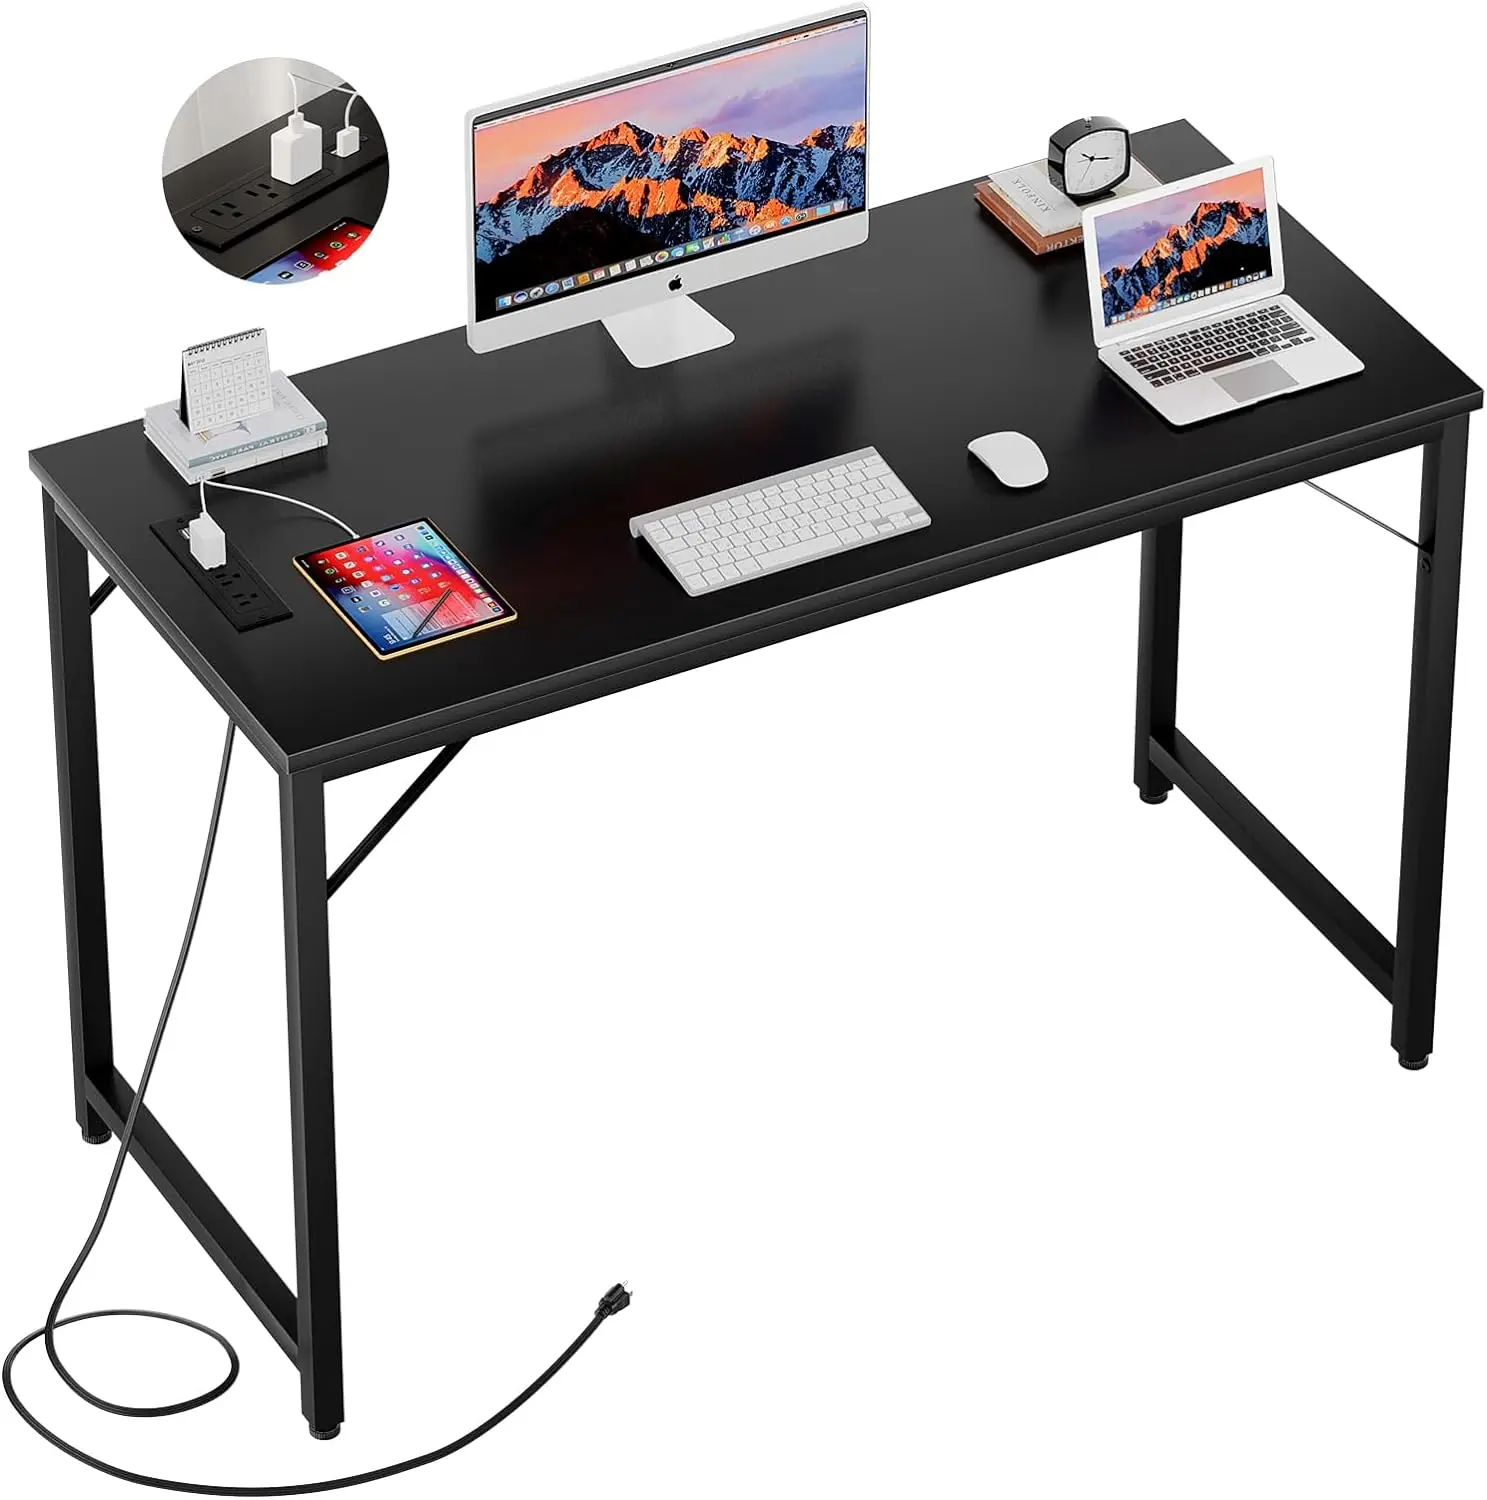 47 Inch Computer Desk with Magic Power Outlets, Modern Office Desk with USB Charging Ports, Sturdy Student Writing Desk new magic book montessori calligraphy copybook kid notebook reusable calligraphy handwriting copybook copybook writing gifts